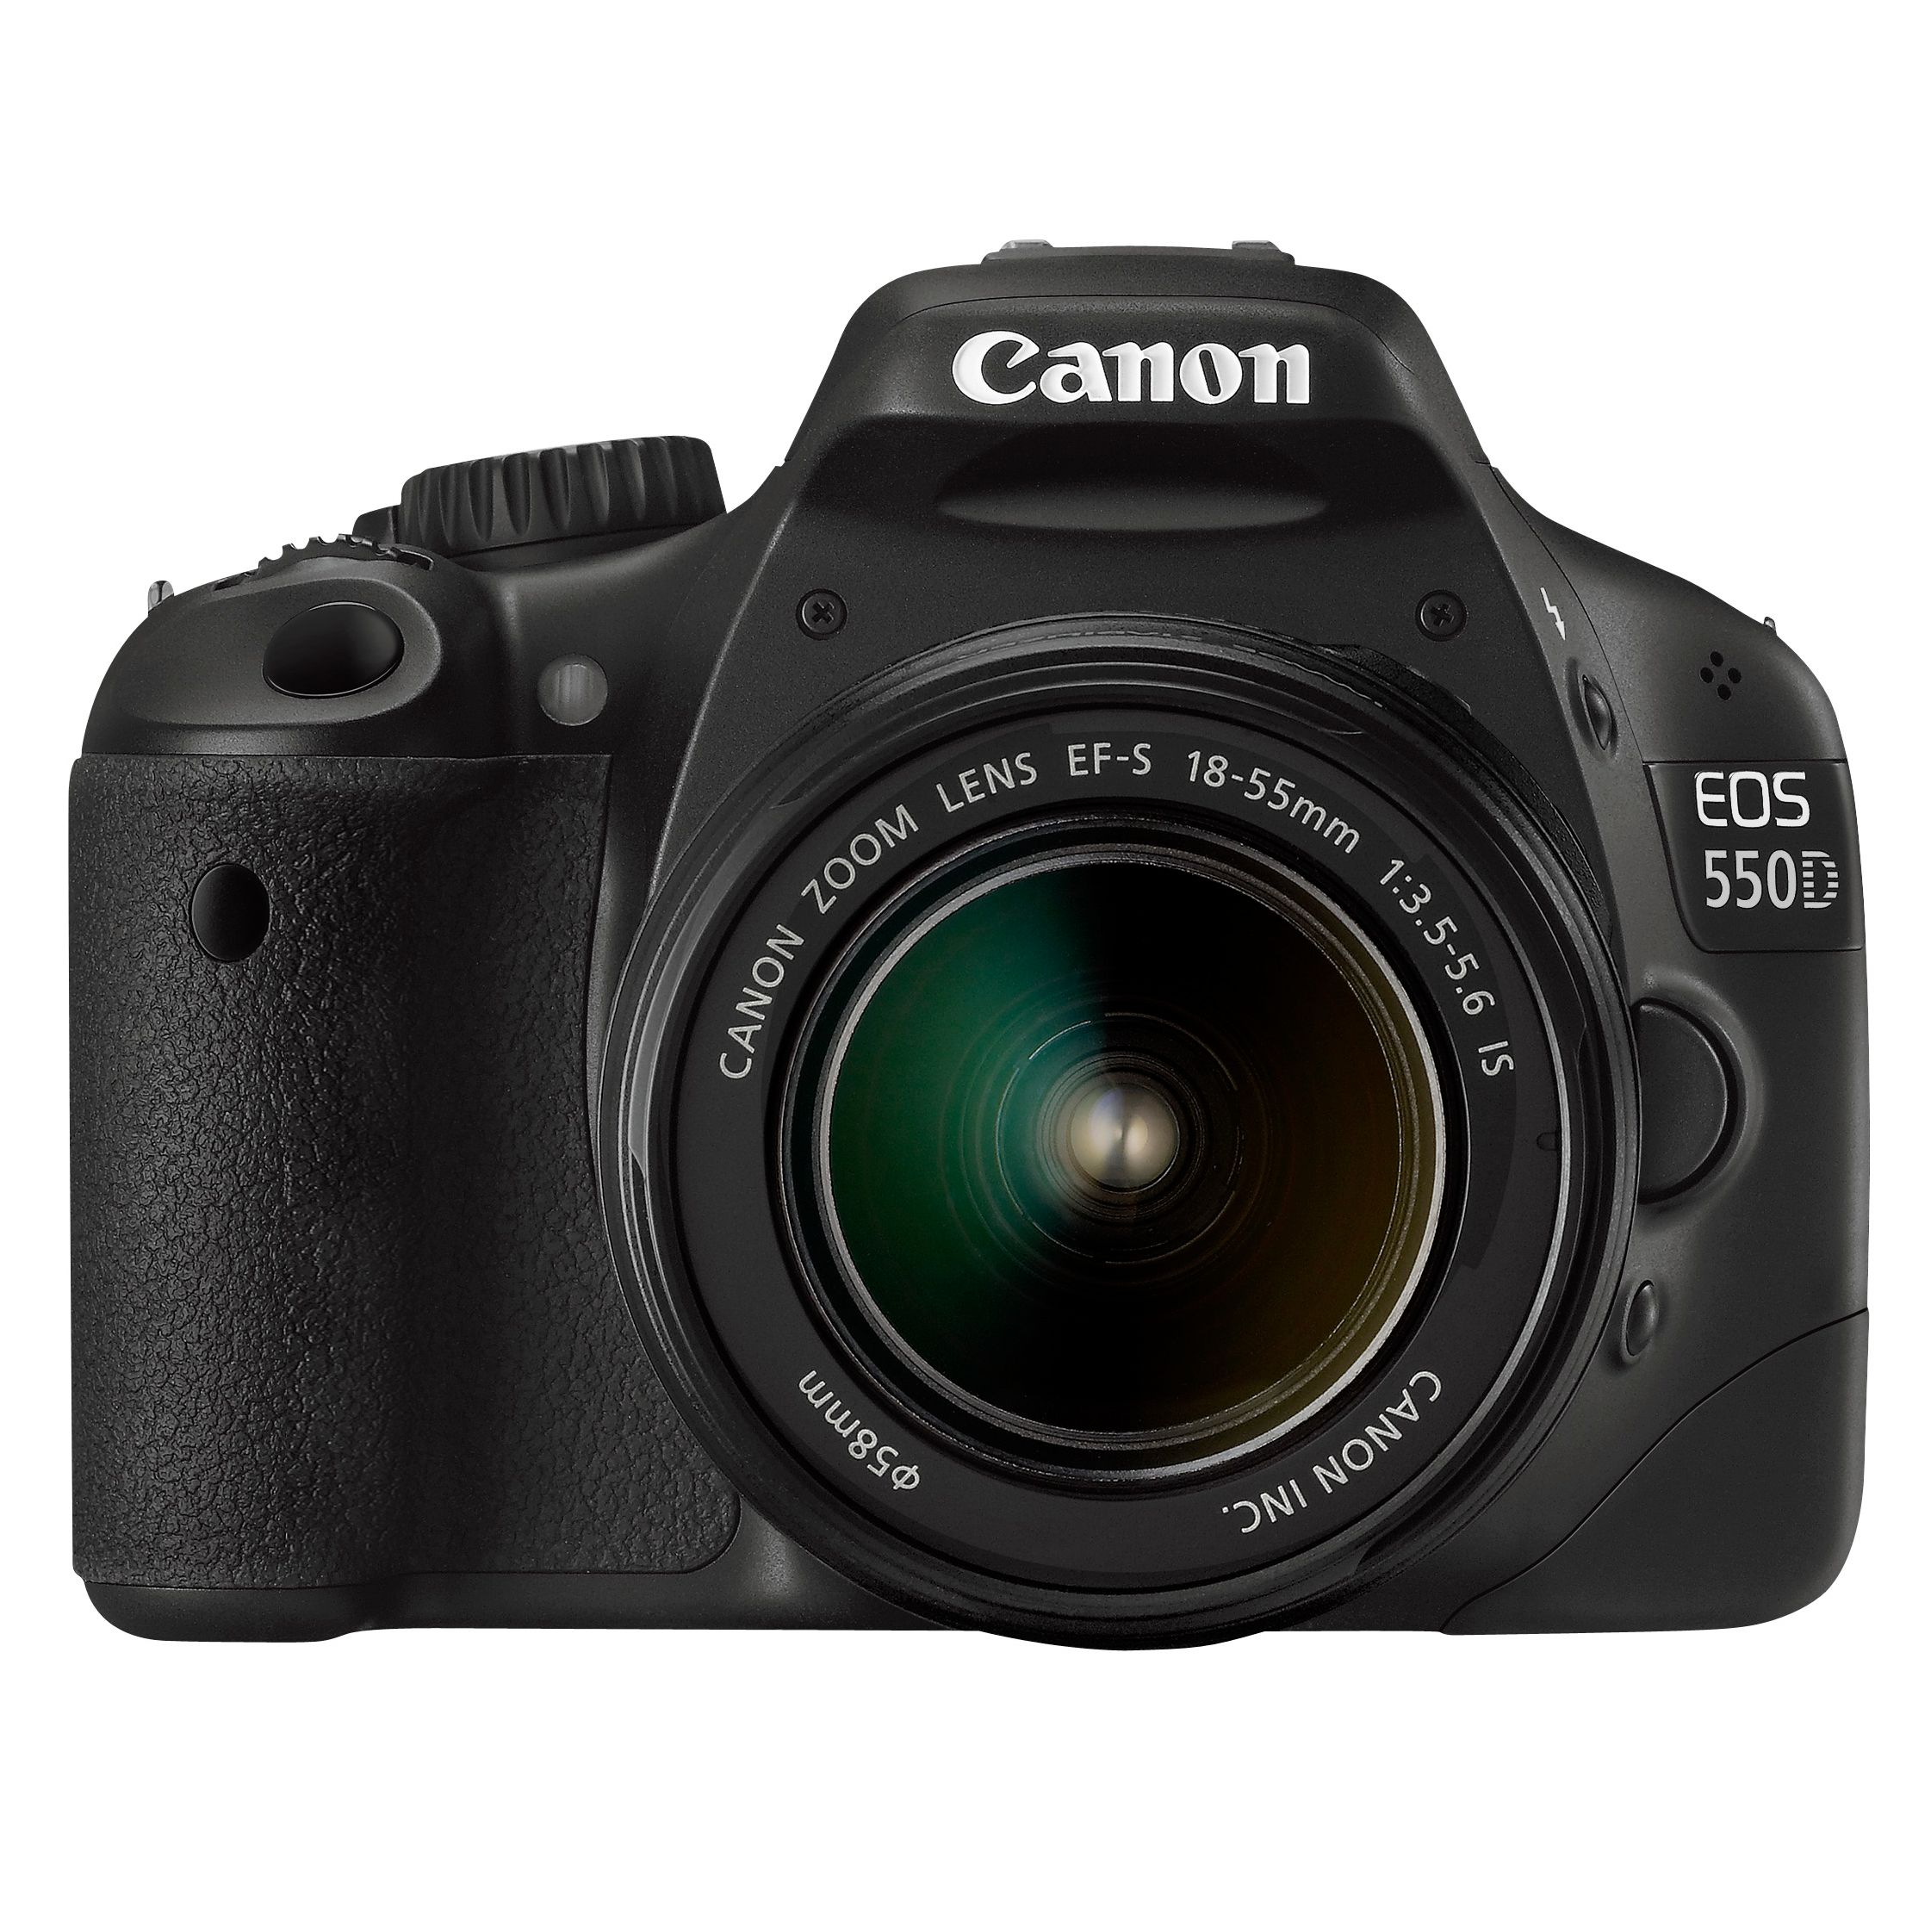 Canon EOS 550D Digital SLR Camera with 18-55mm IS Lens at John Lewis